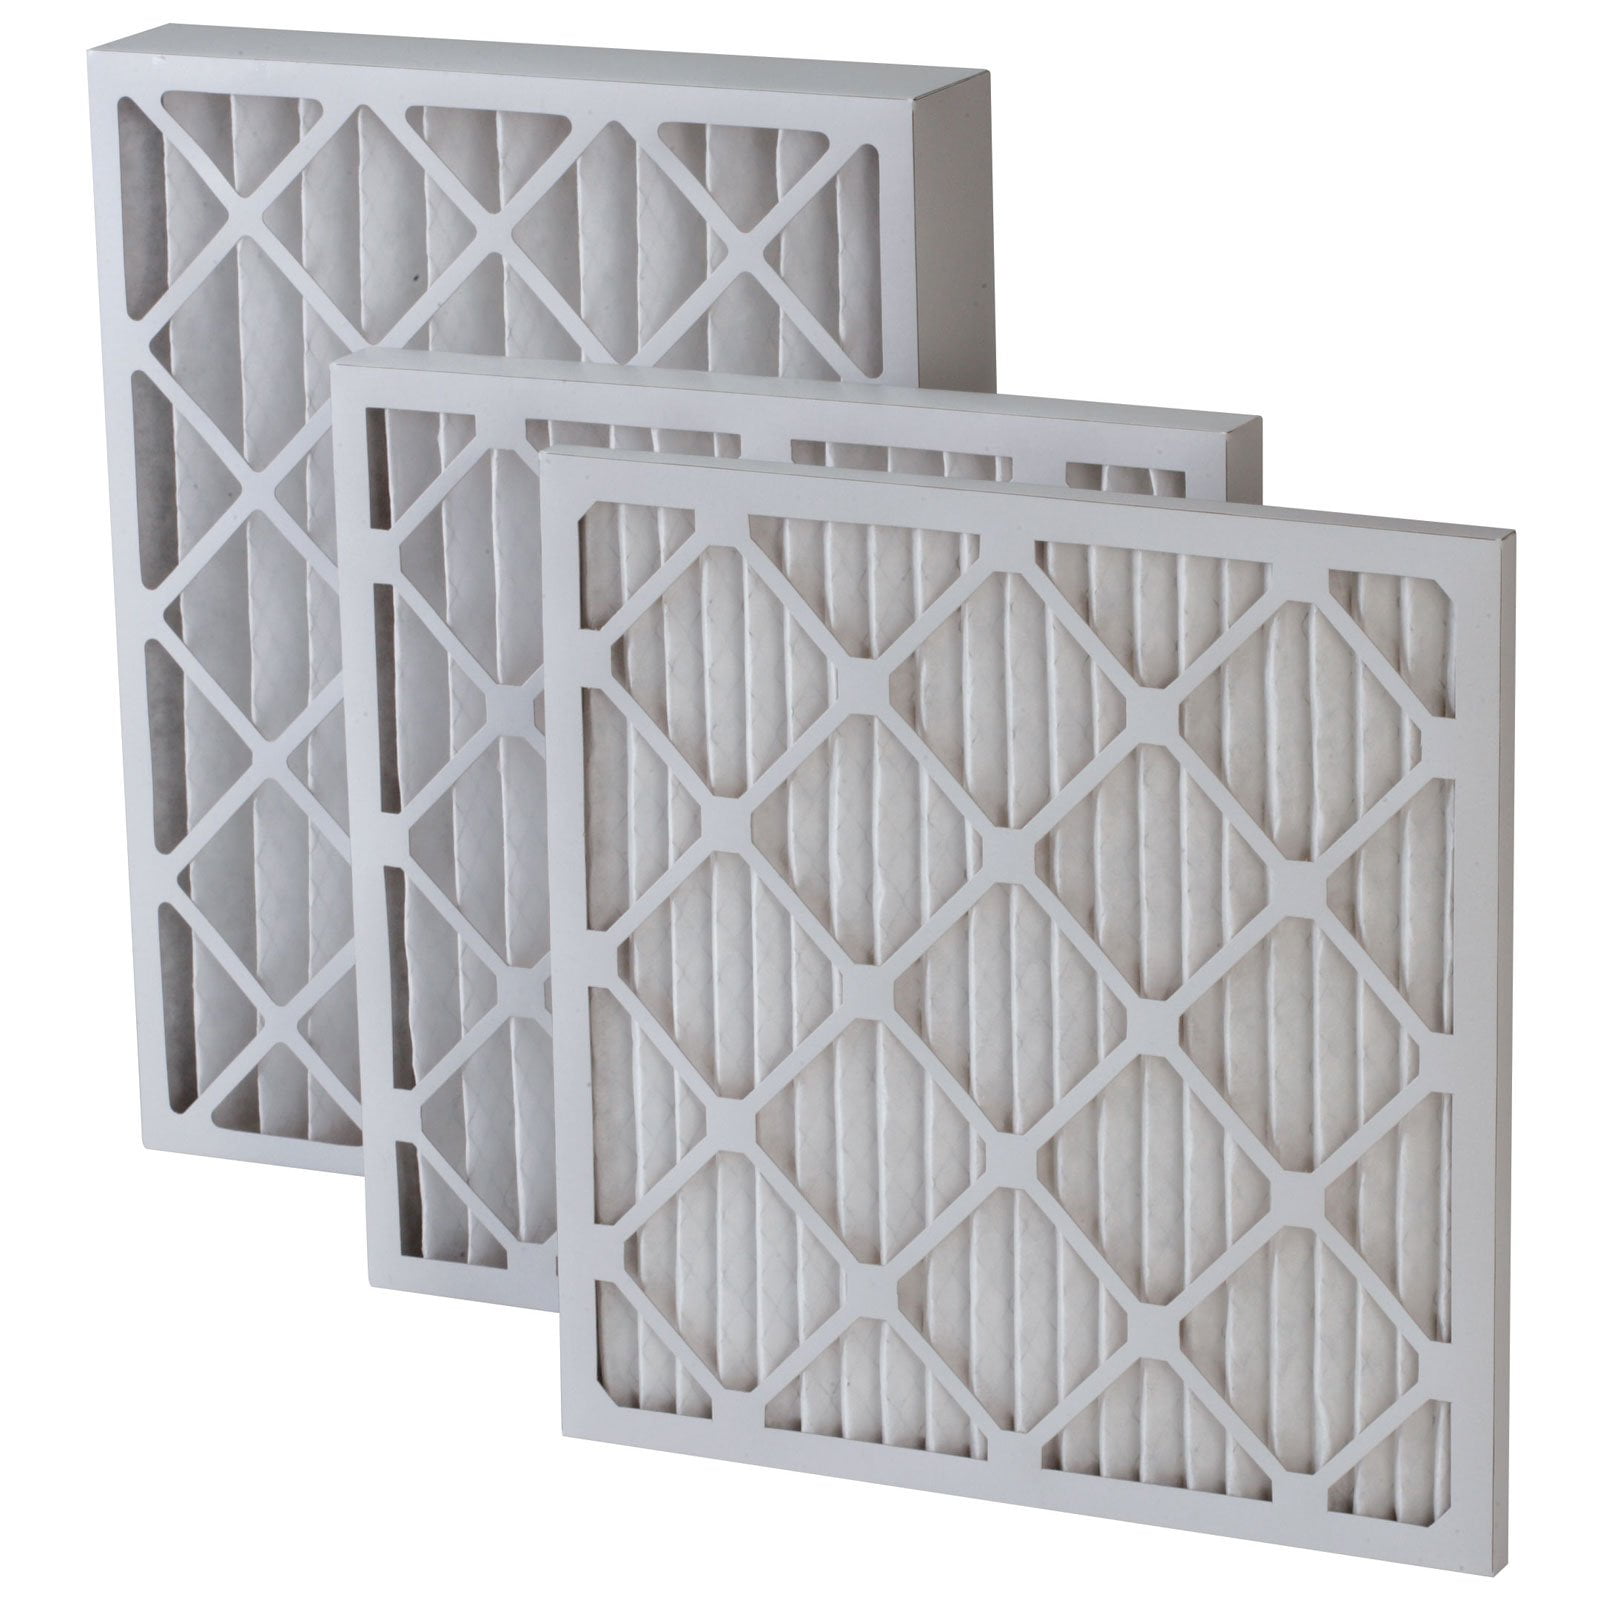 You are currently viewing Furnace Filter